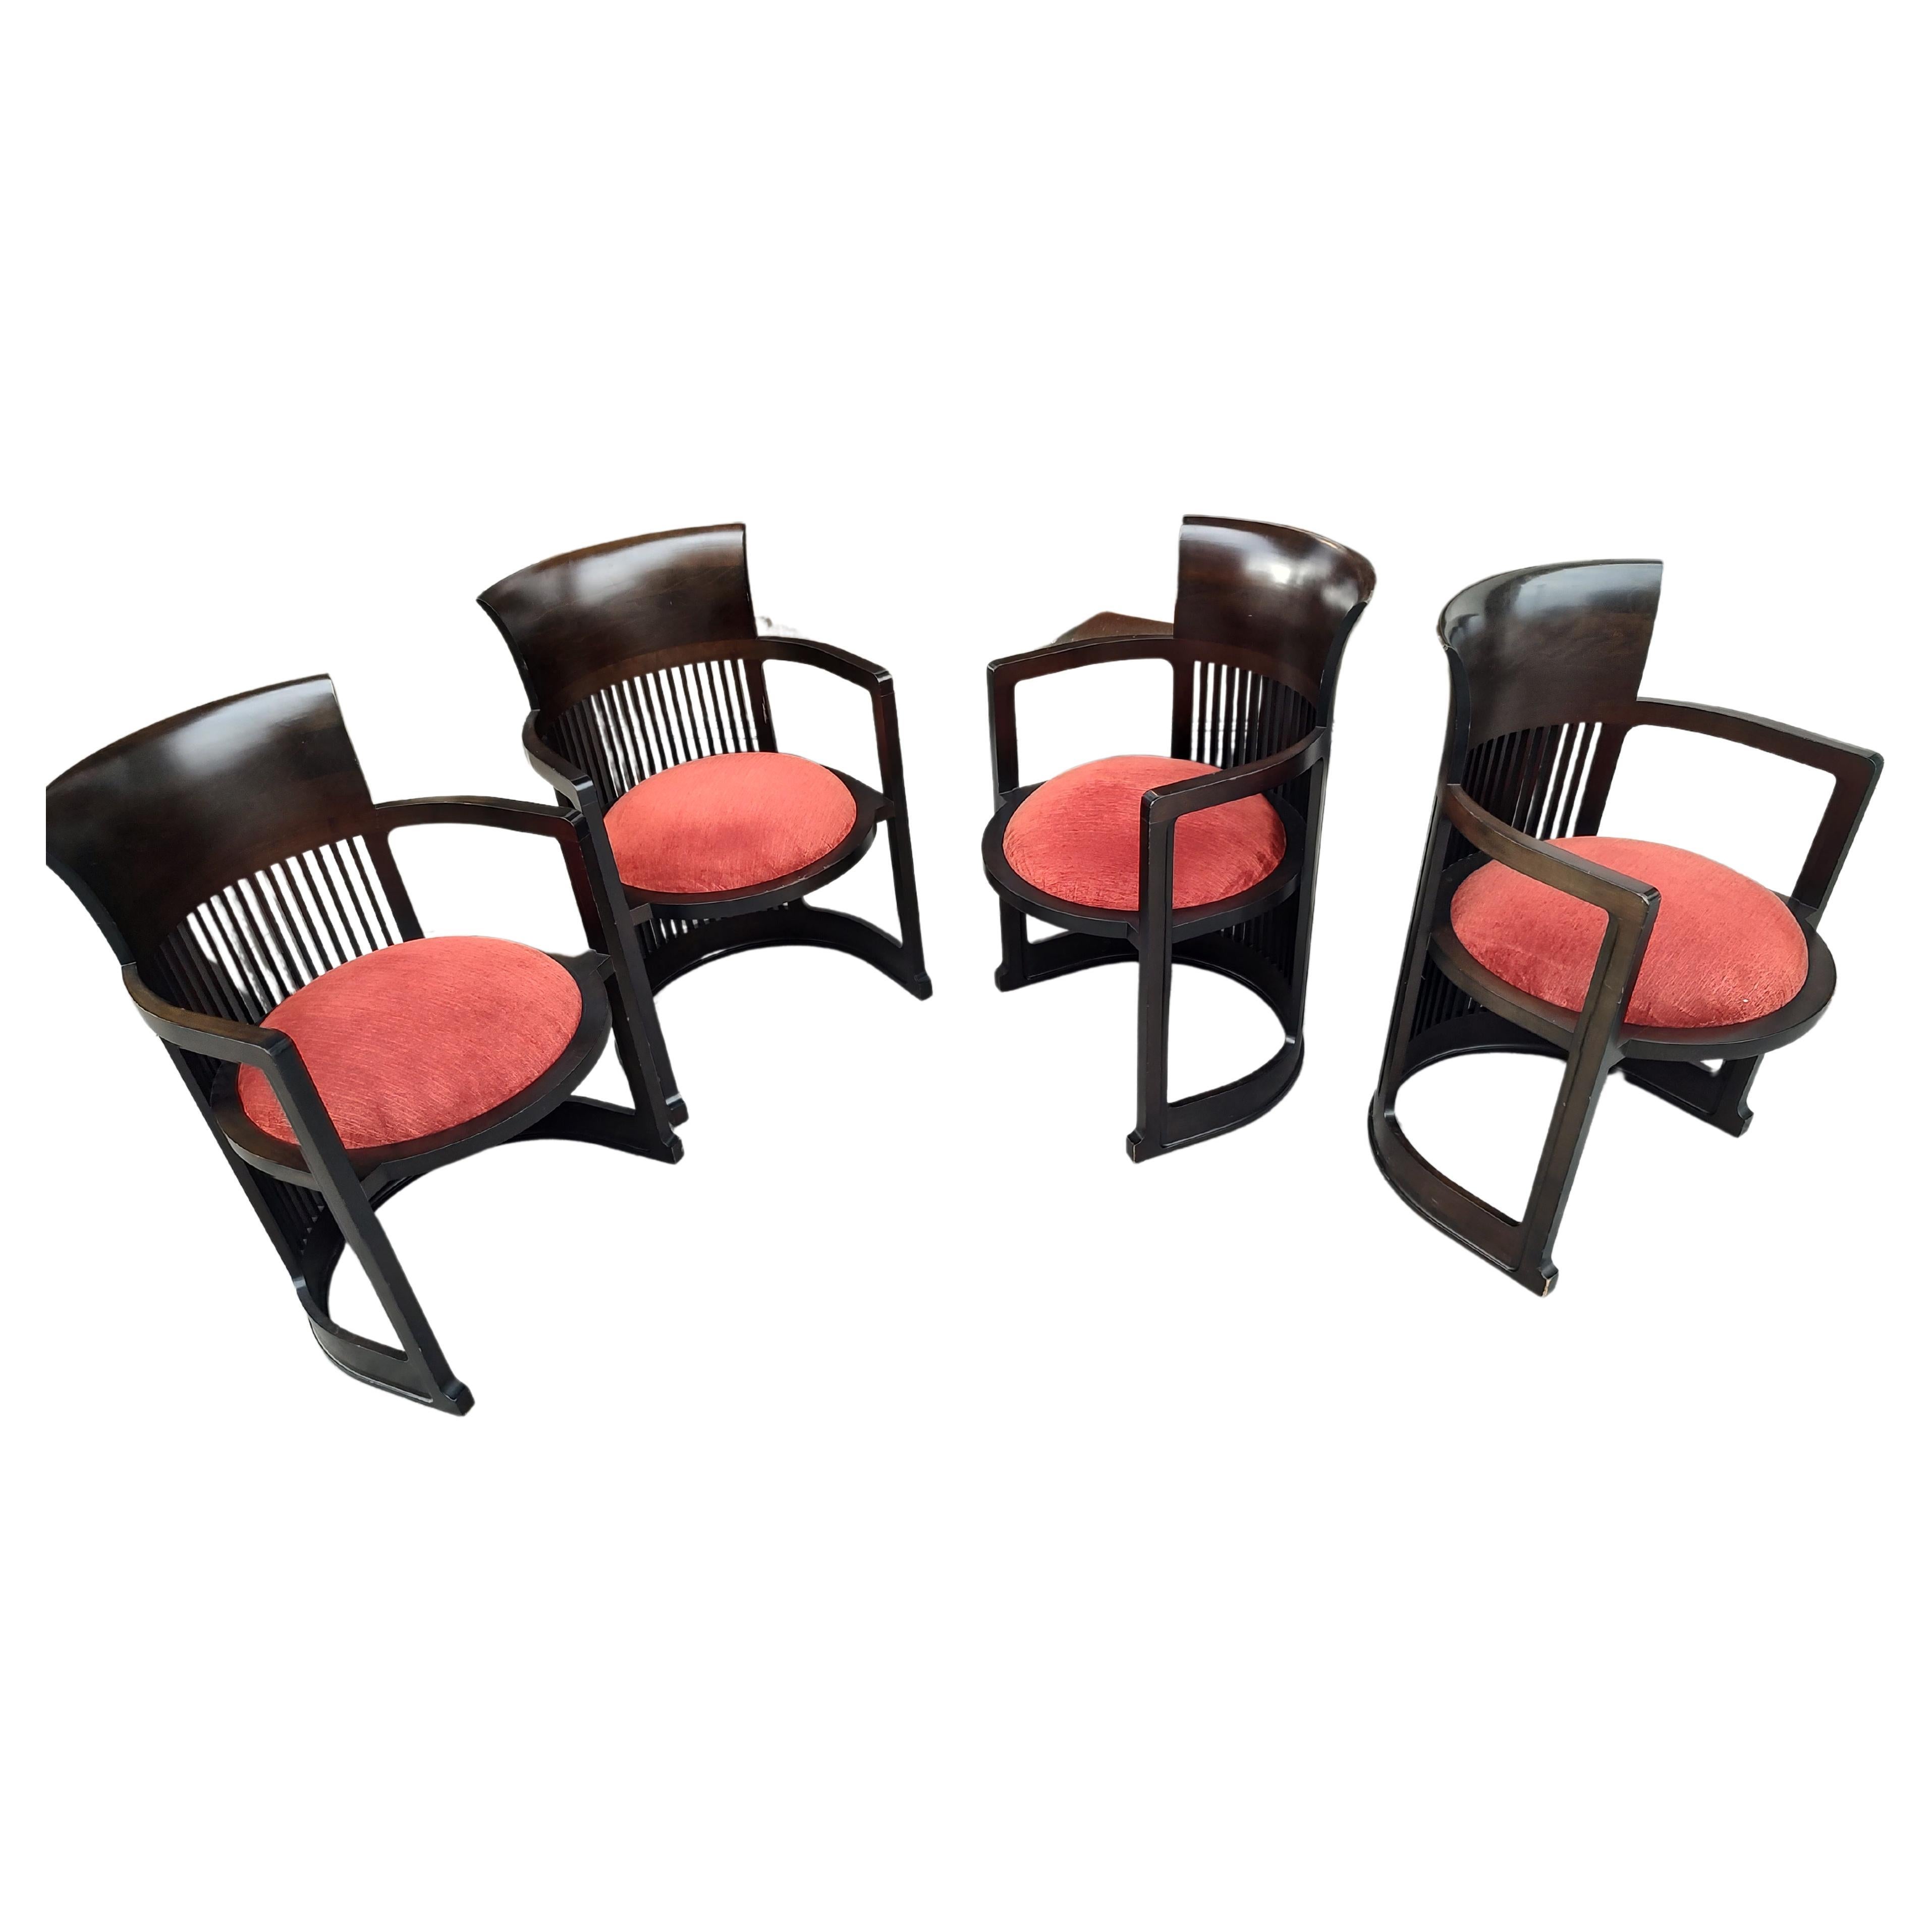 Mid-Century Modern Arts & Crafts Set of 4 Frank Lloyd Wright Chairs by Cassina For Sale